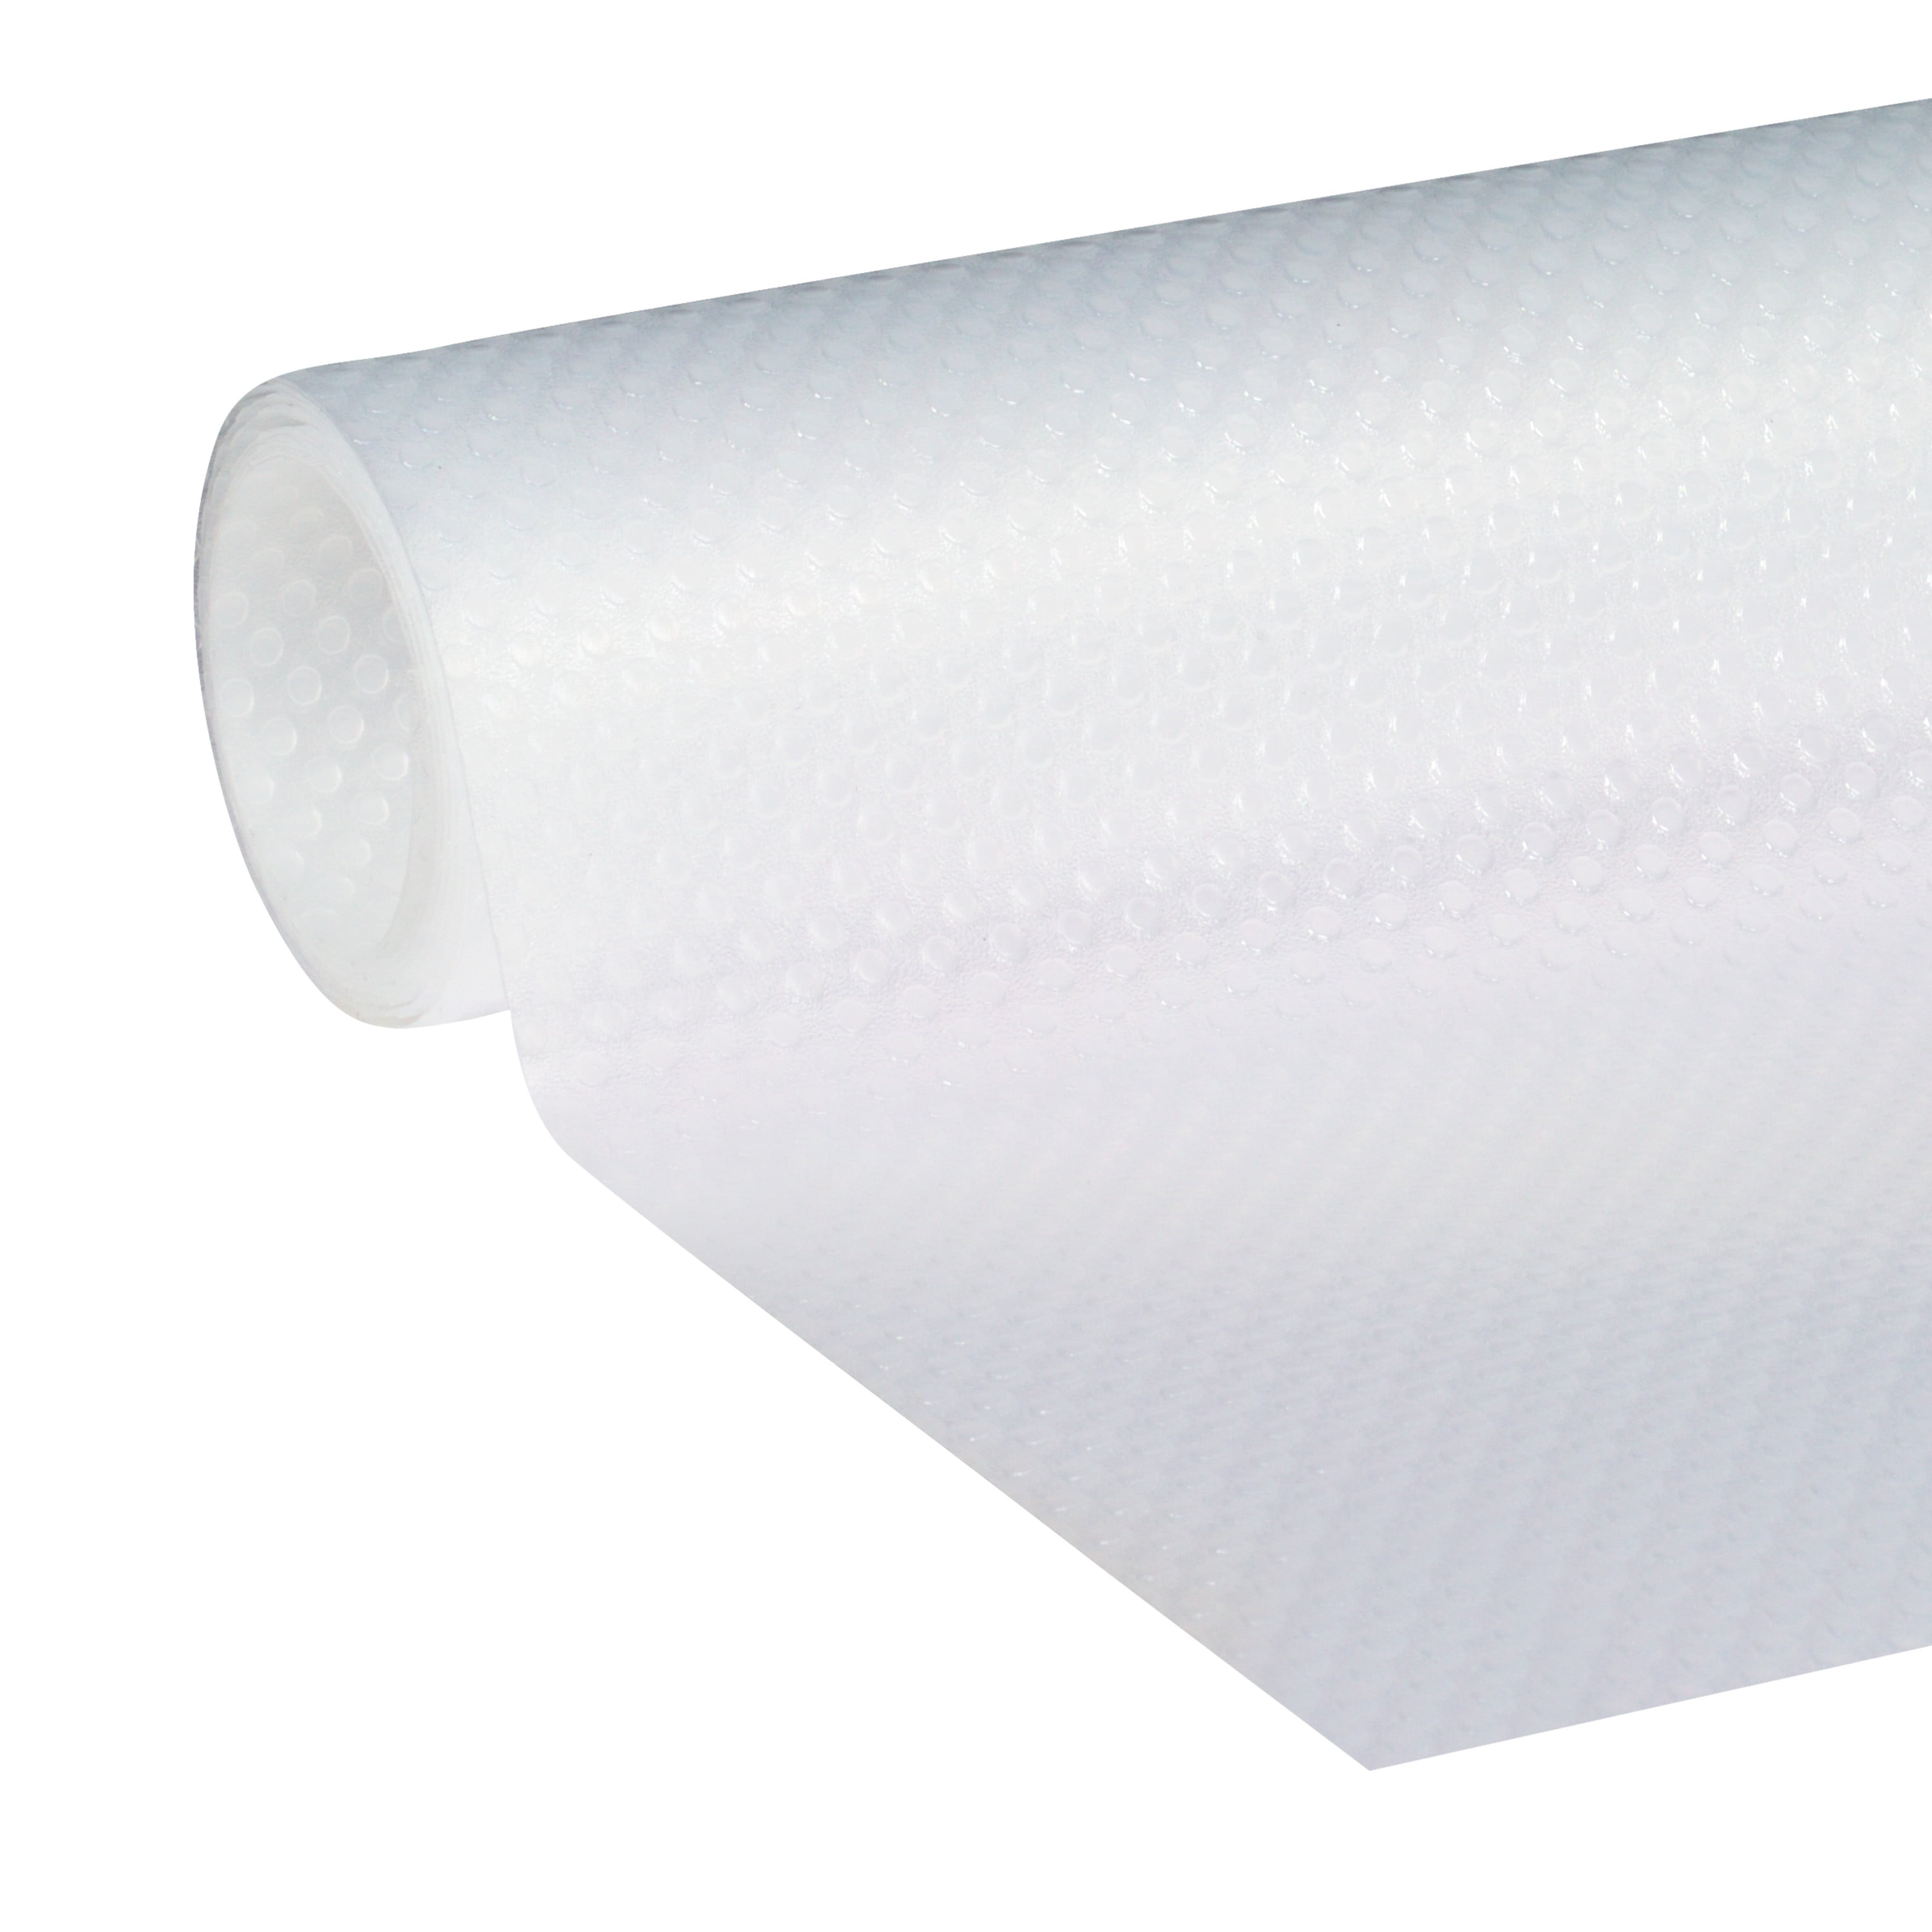 EasyLiner Clear Classic 20 in. x 4 ft. Shelf Liner, Clear